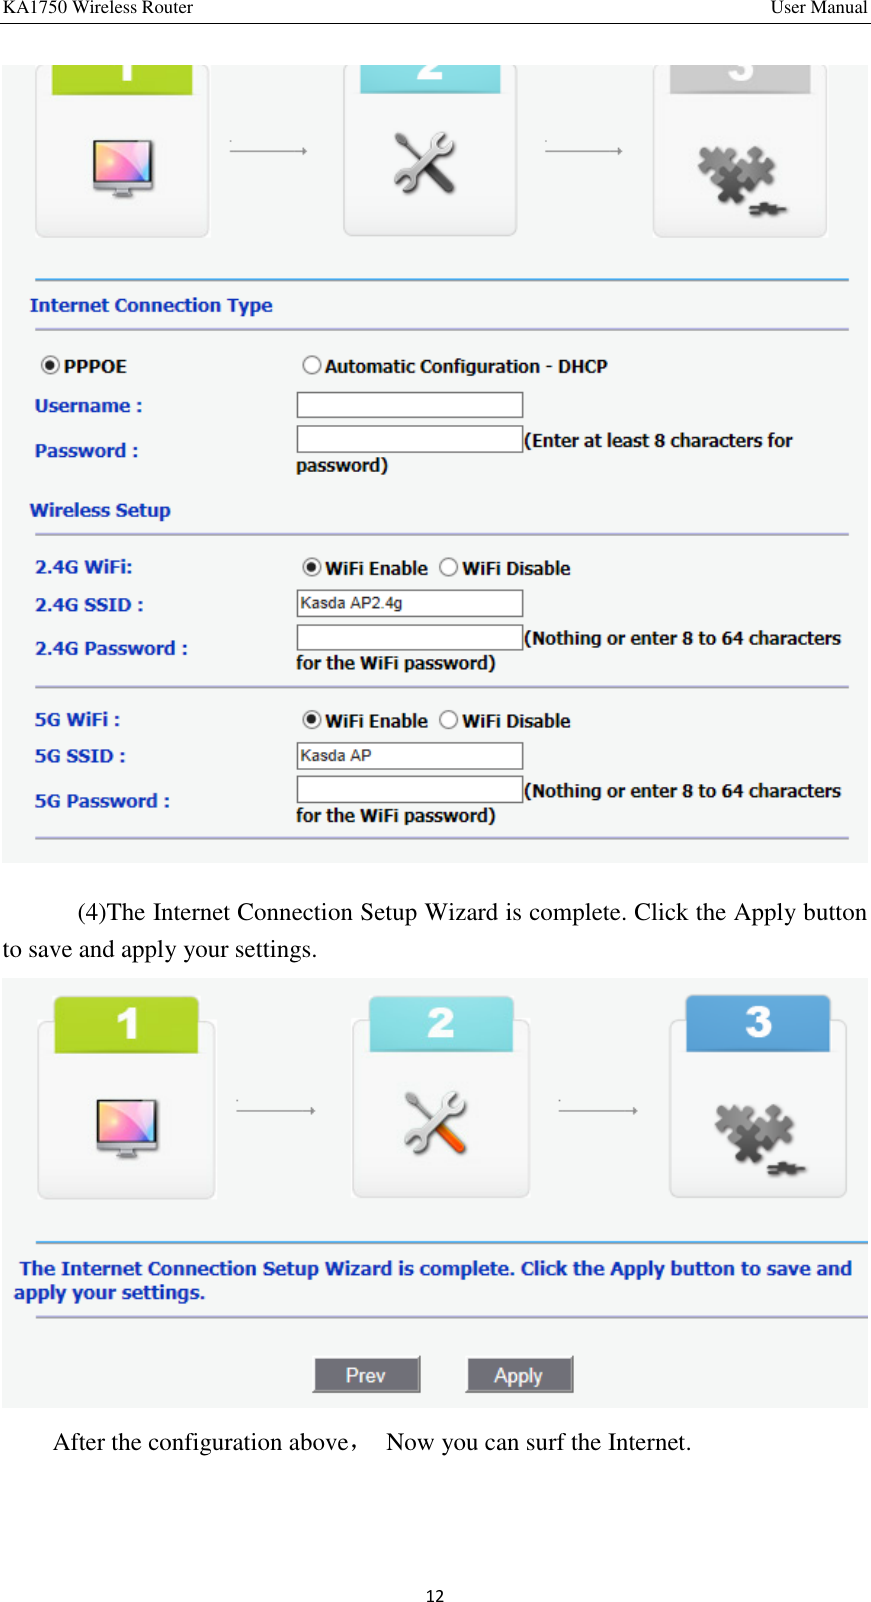 KA1750 Wireless Router       User Manual 12  (4)The Internet Connection Setup Wizard is complete. Click the Apply button to save and apply your settings.    After the configuration above，  Now you can surf the Internet. 